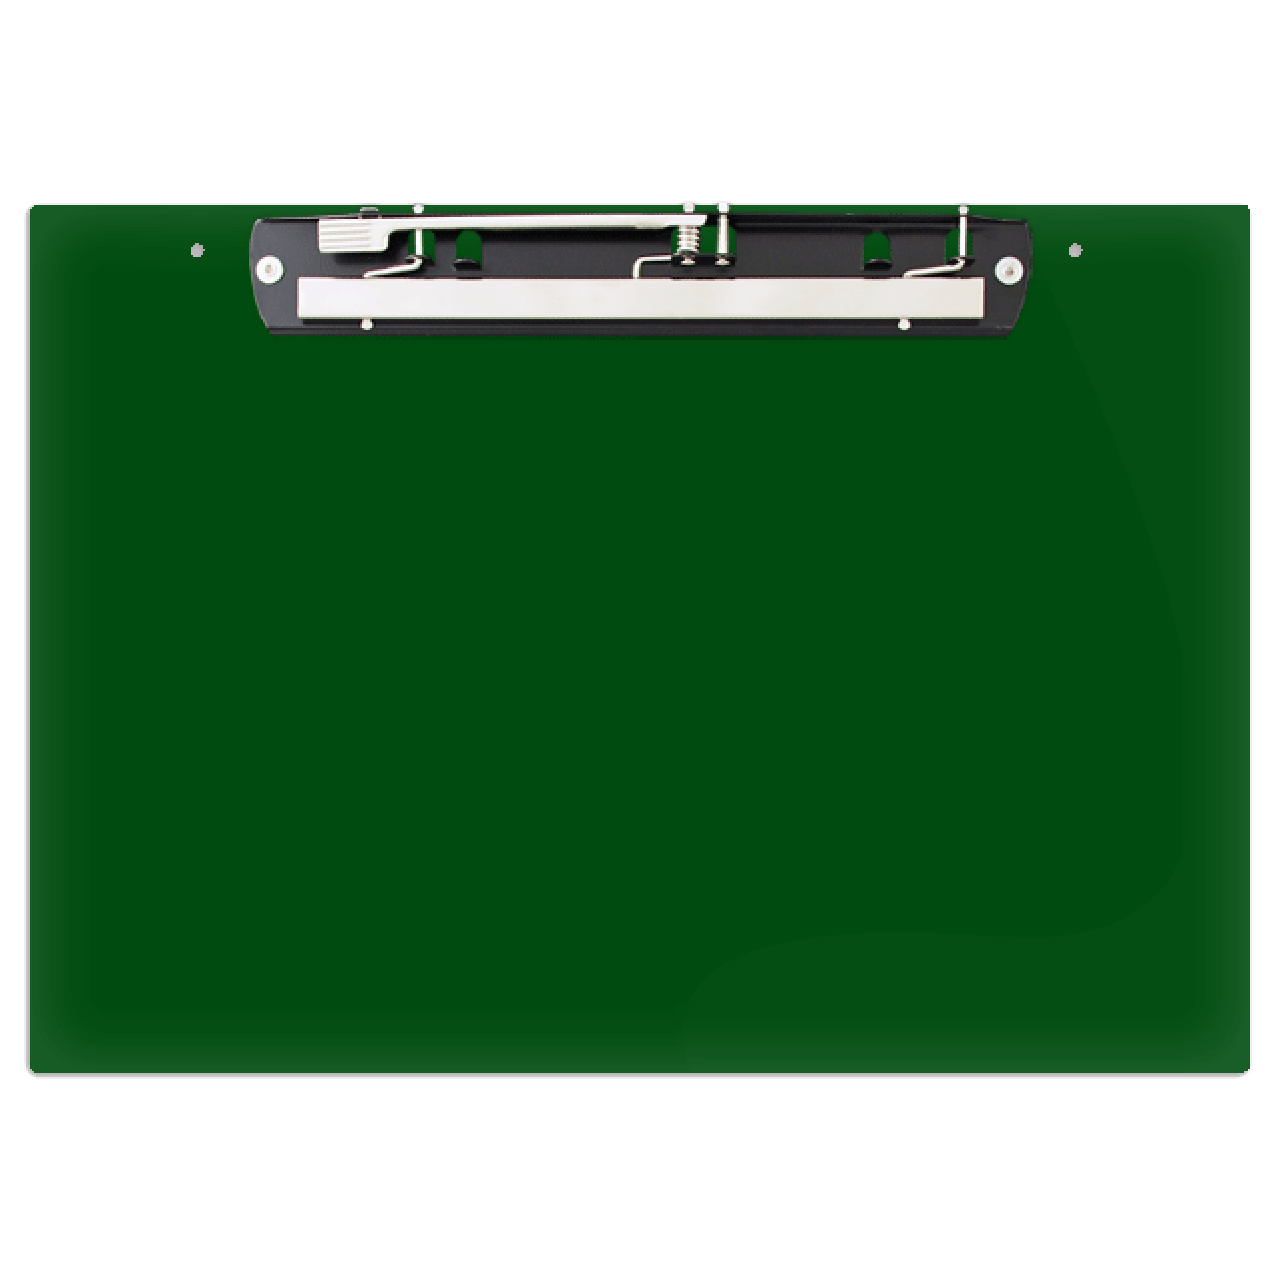 11x17 Clipboard Acrylic Panel Featuring an 8 Hinge Clip Green